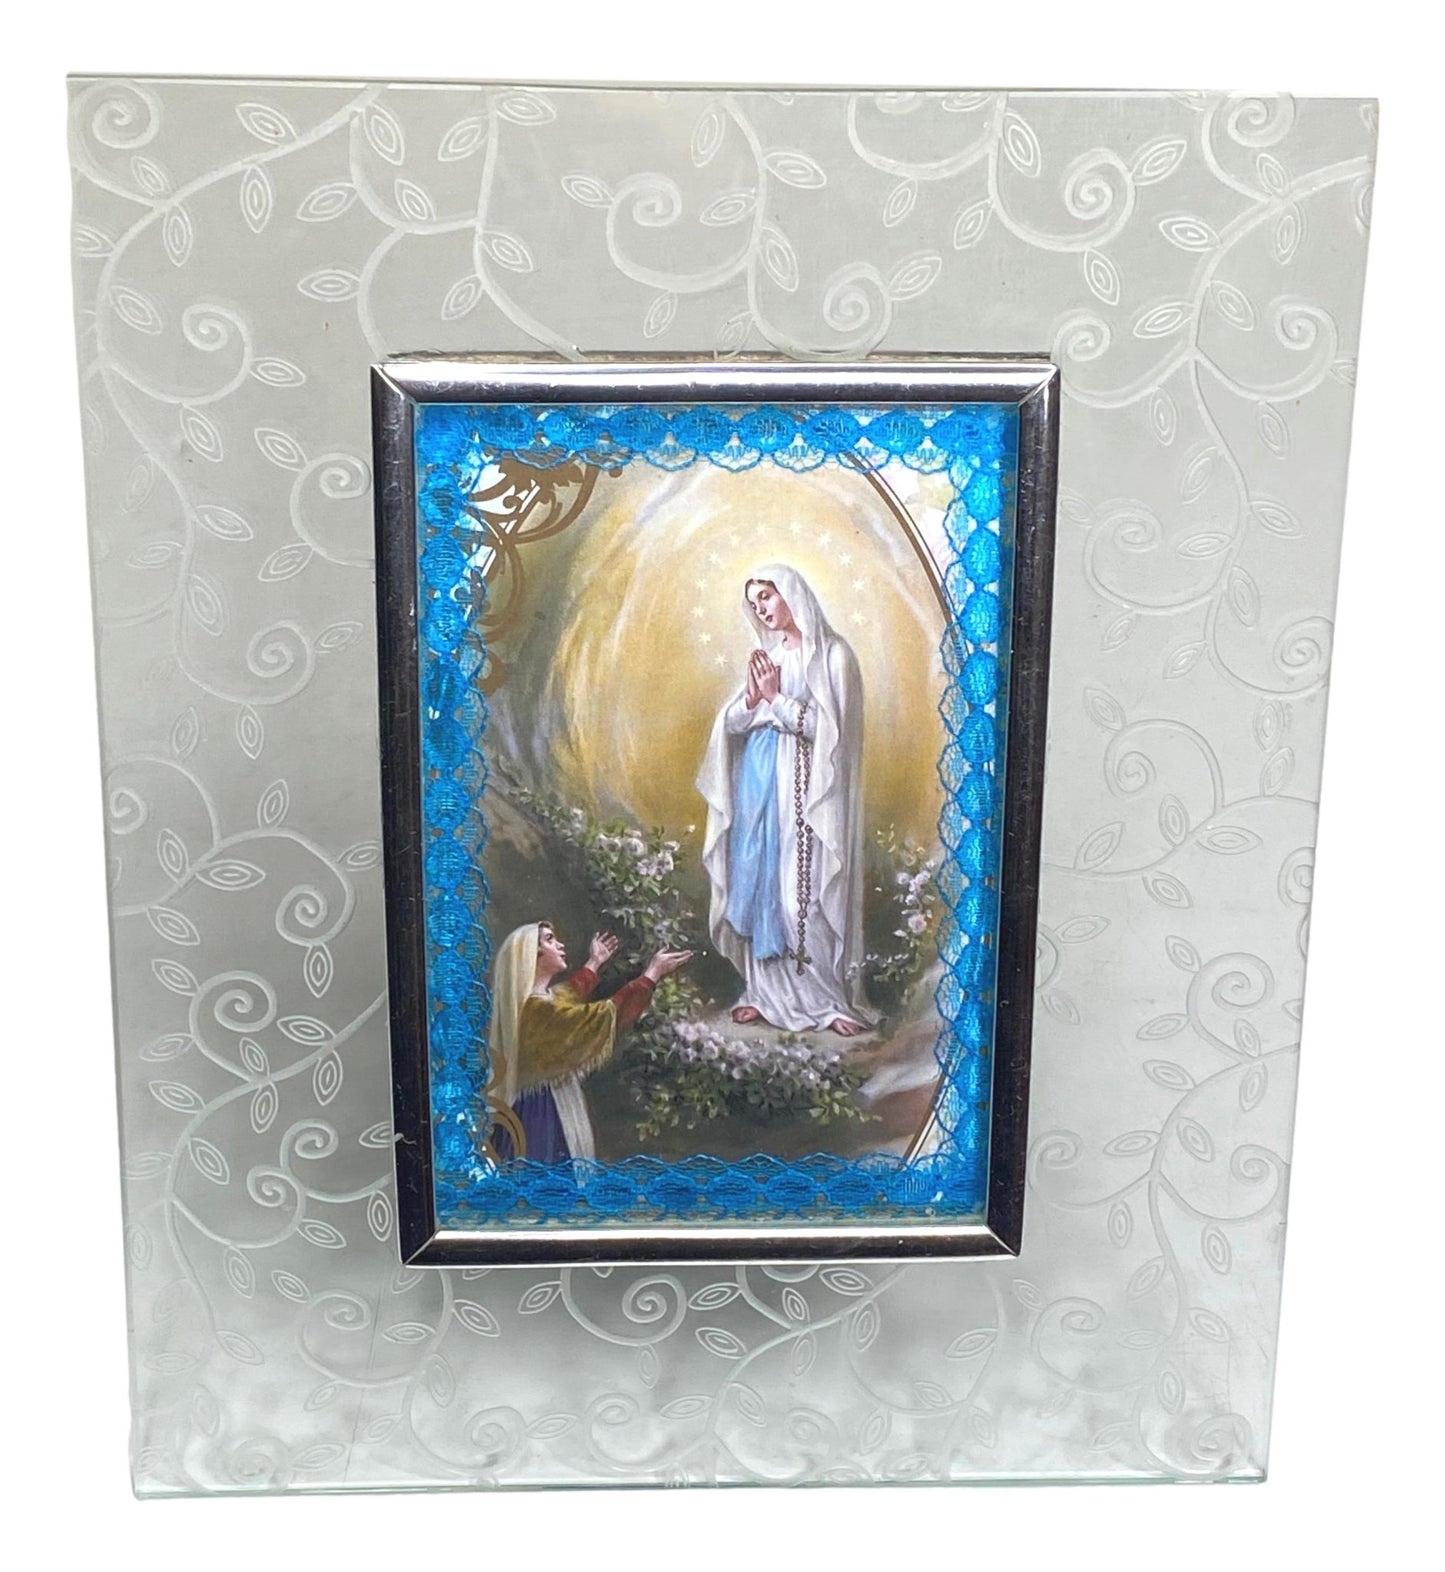 Frame Glass Leaf Pattern Our Lady of Fatima Image Handcrafted